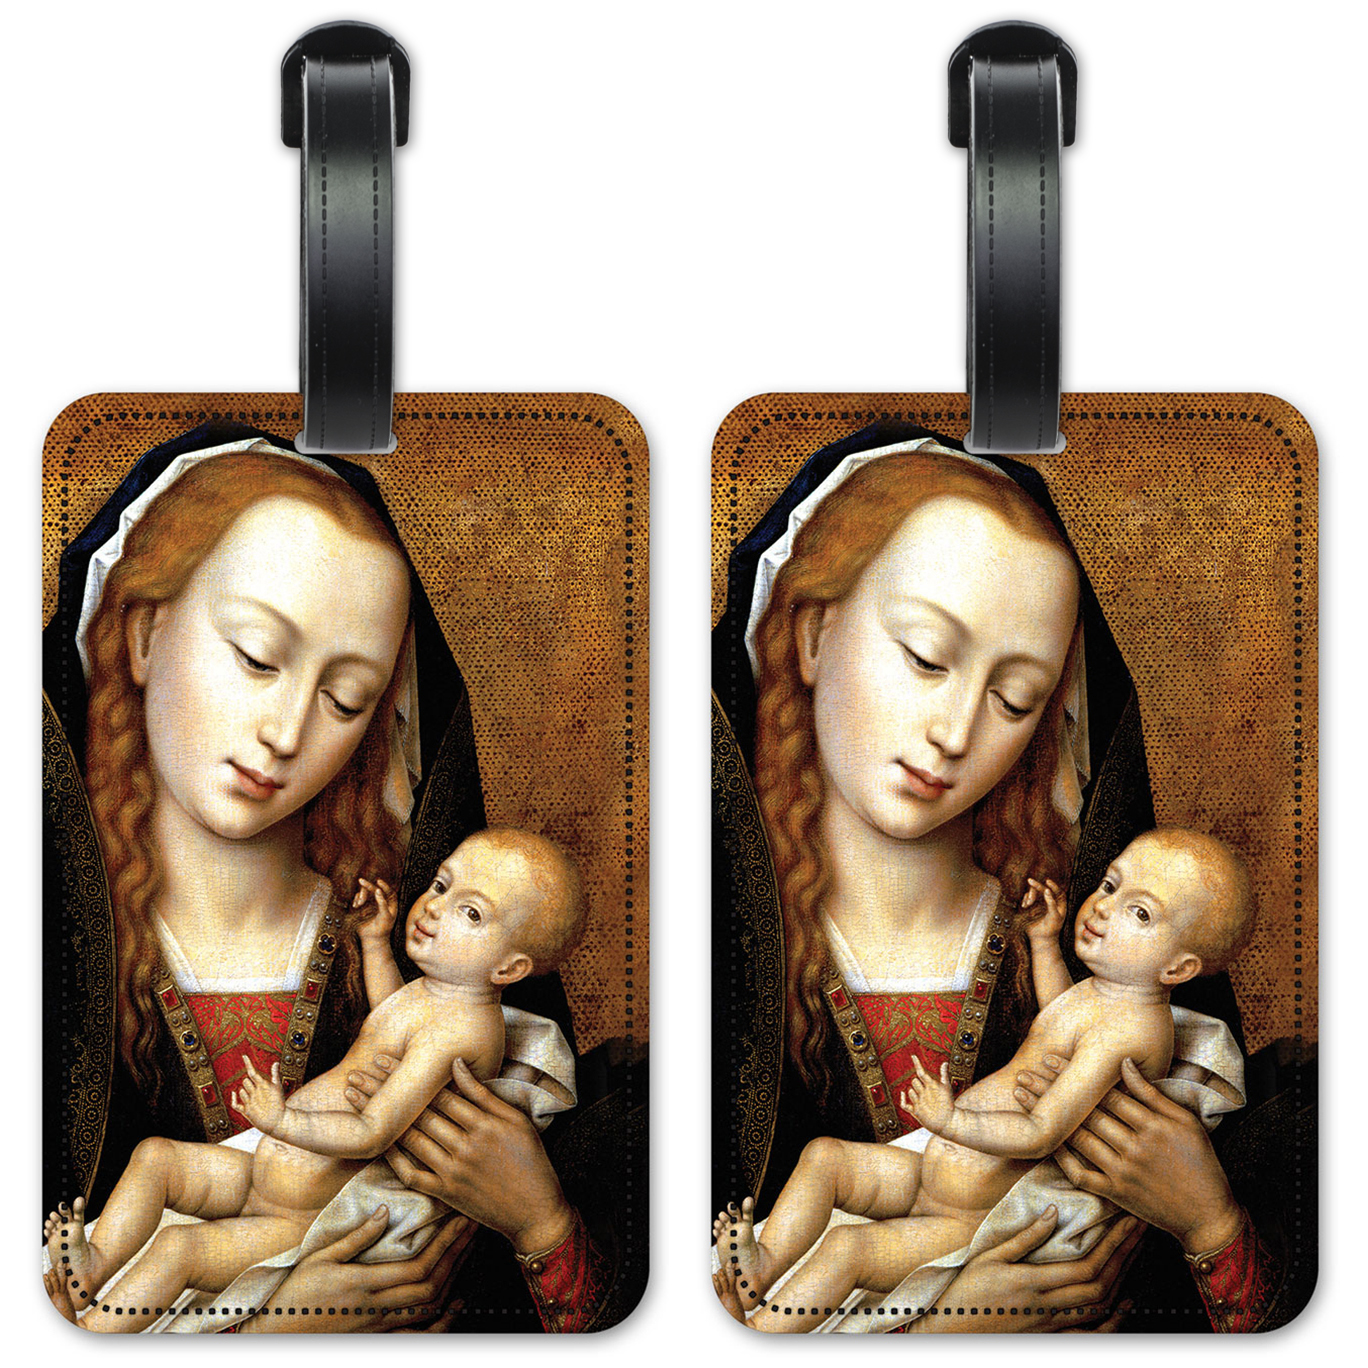 Virgin and Child - #630